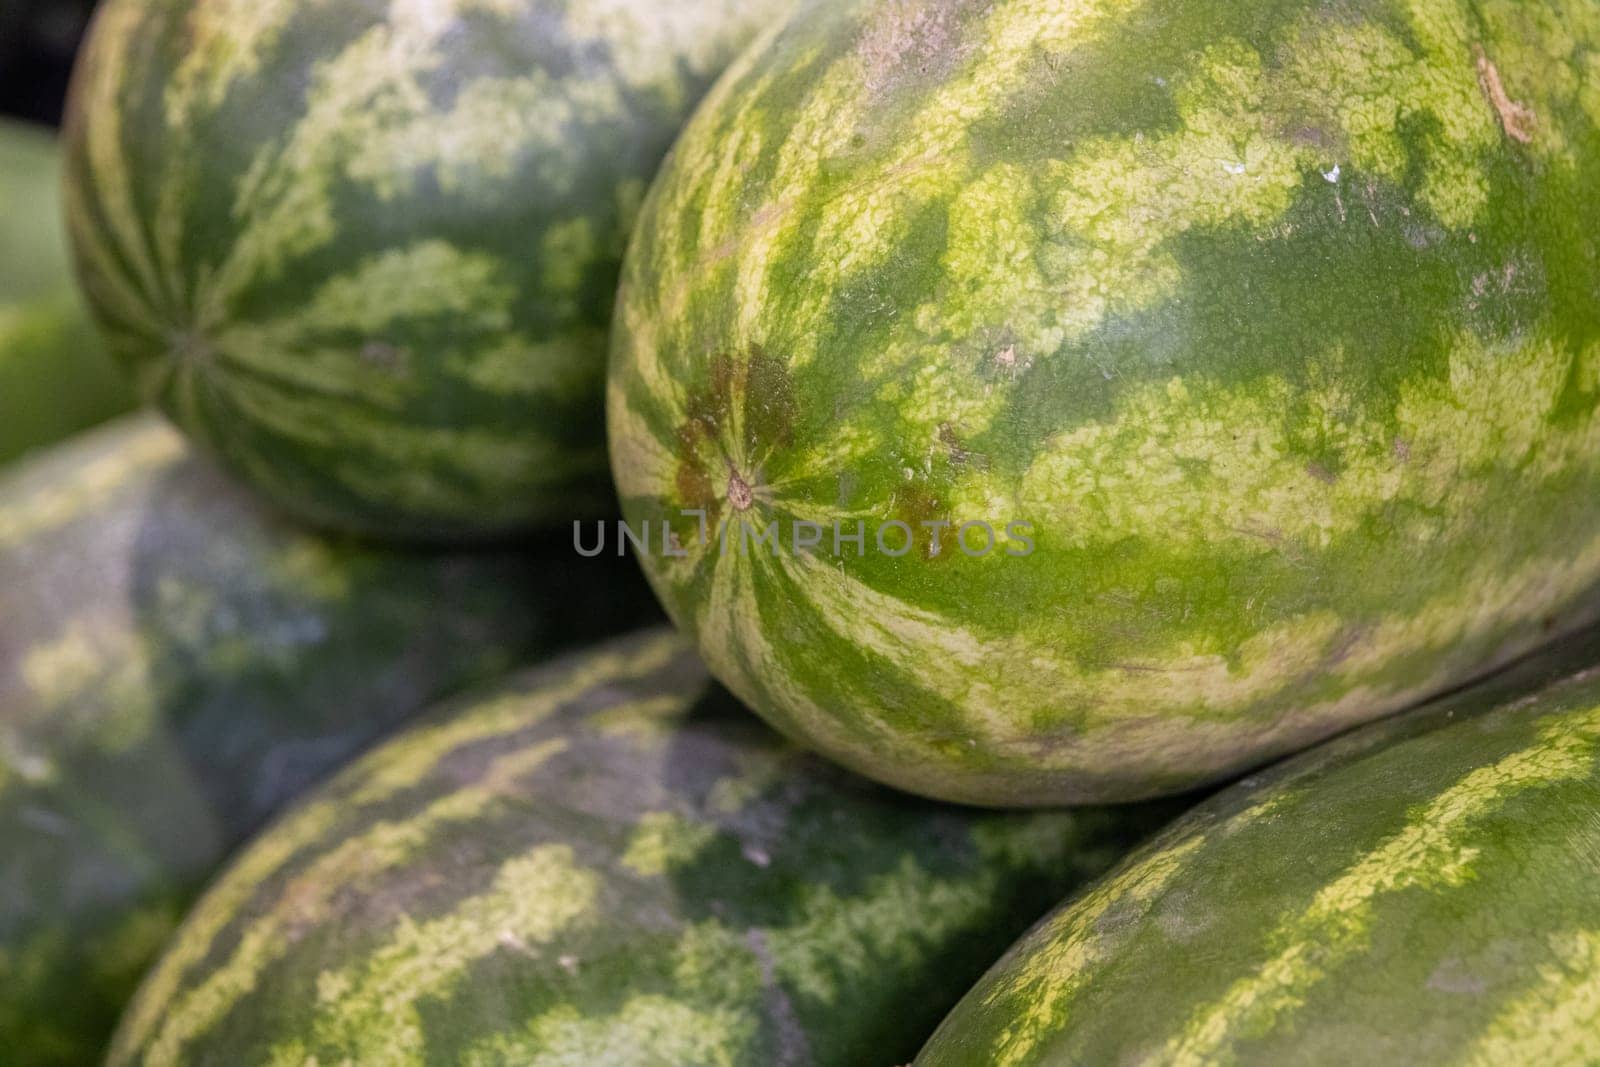 Stack of Watermelons for sale